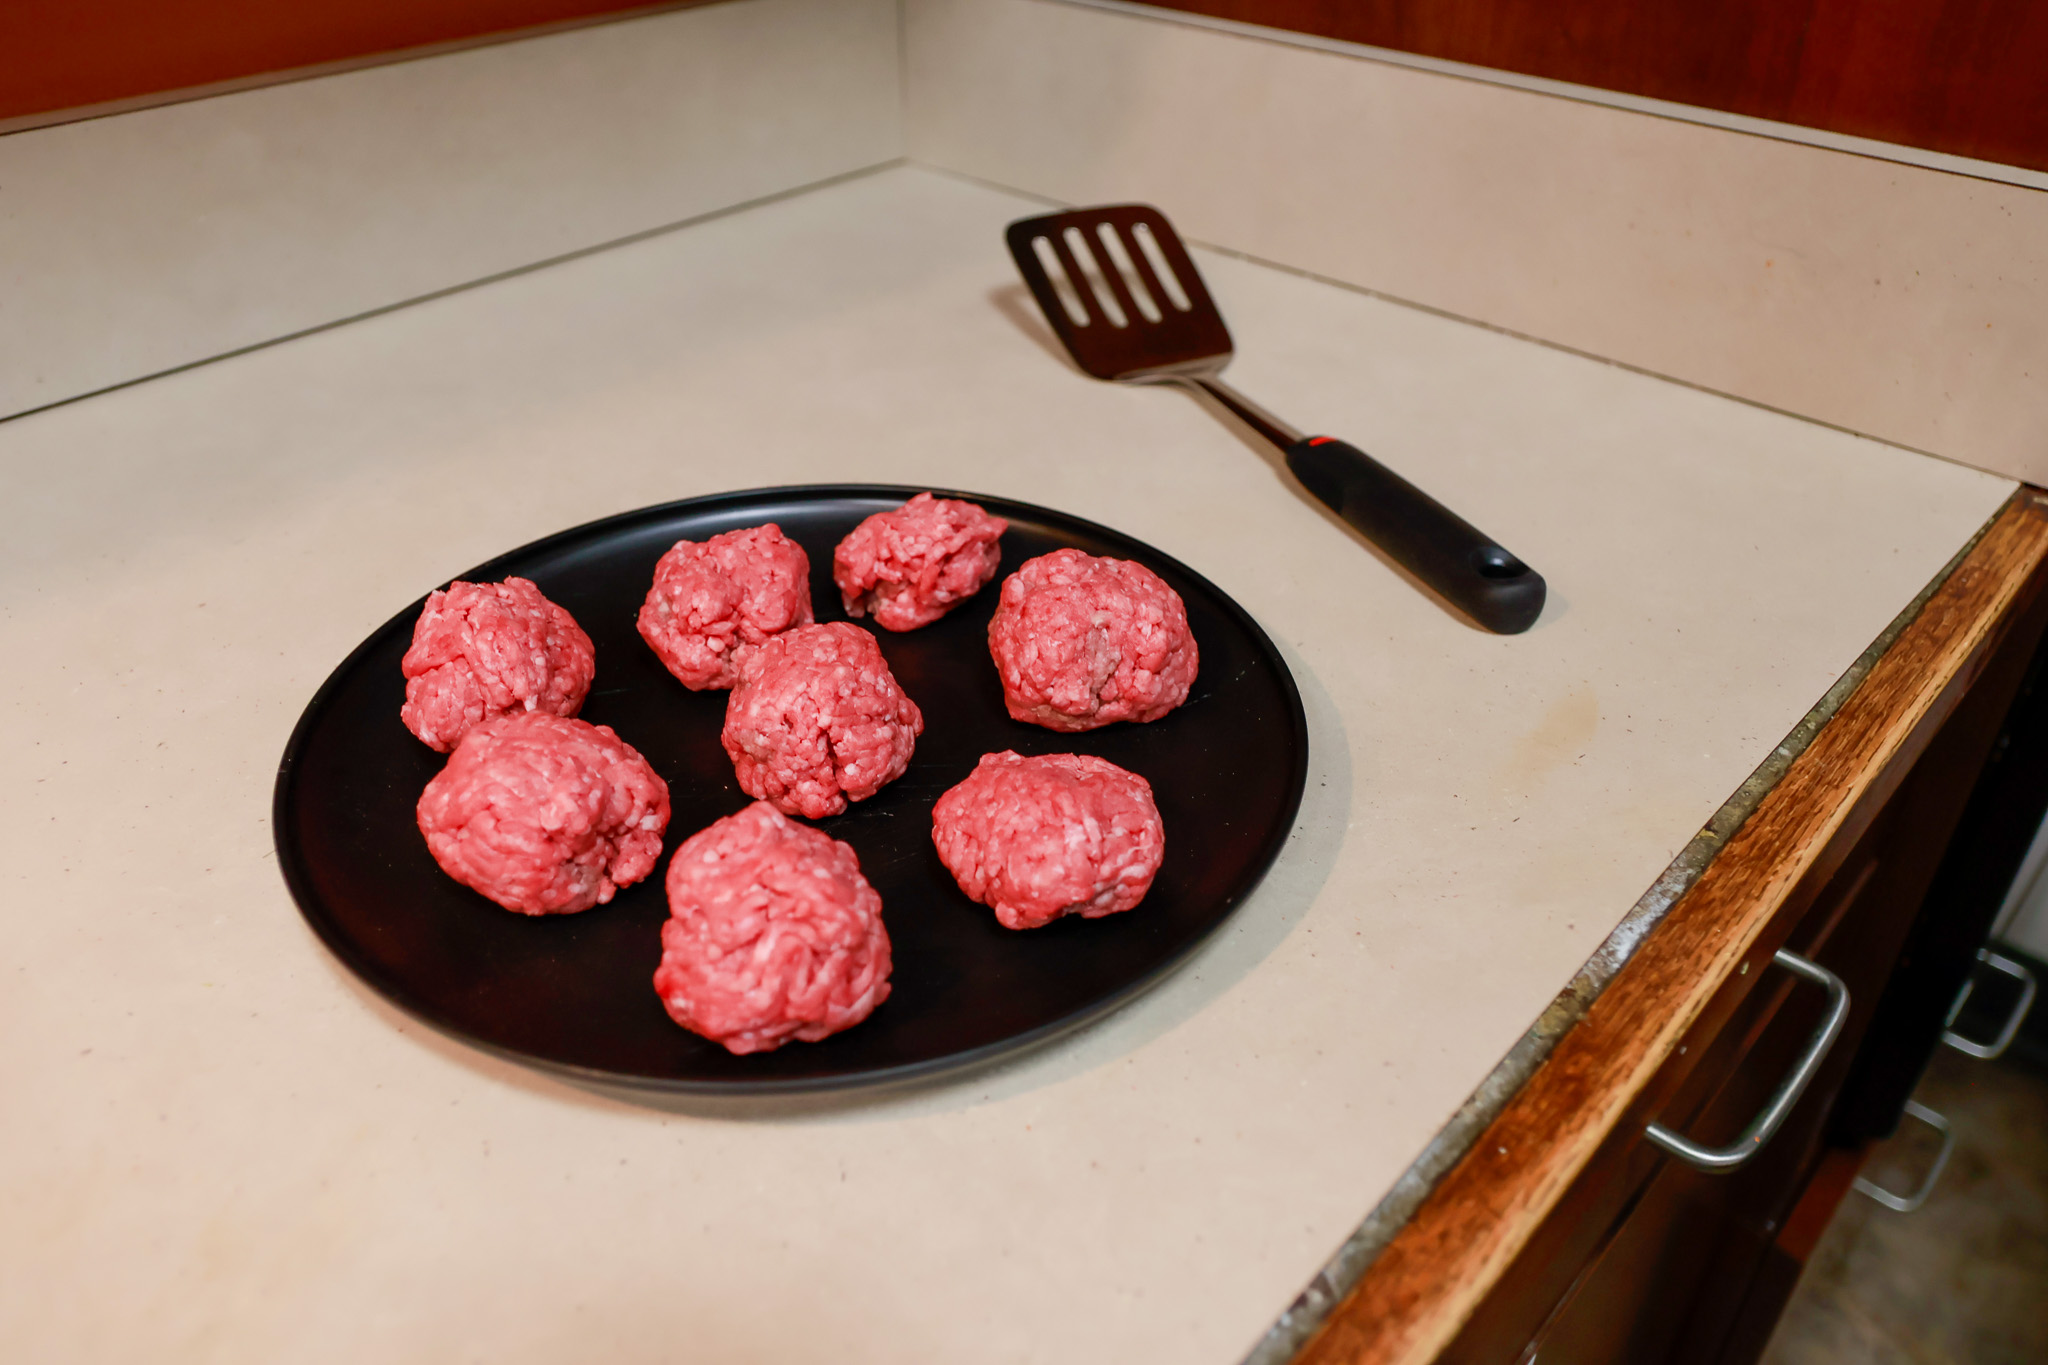 For any type of burger, it is key to use ground beef that is 80% lean and 20% fat.
Sal DiMaggio | The Montclarion